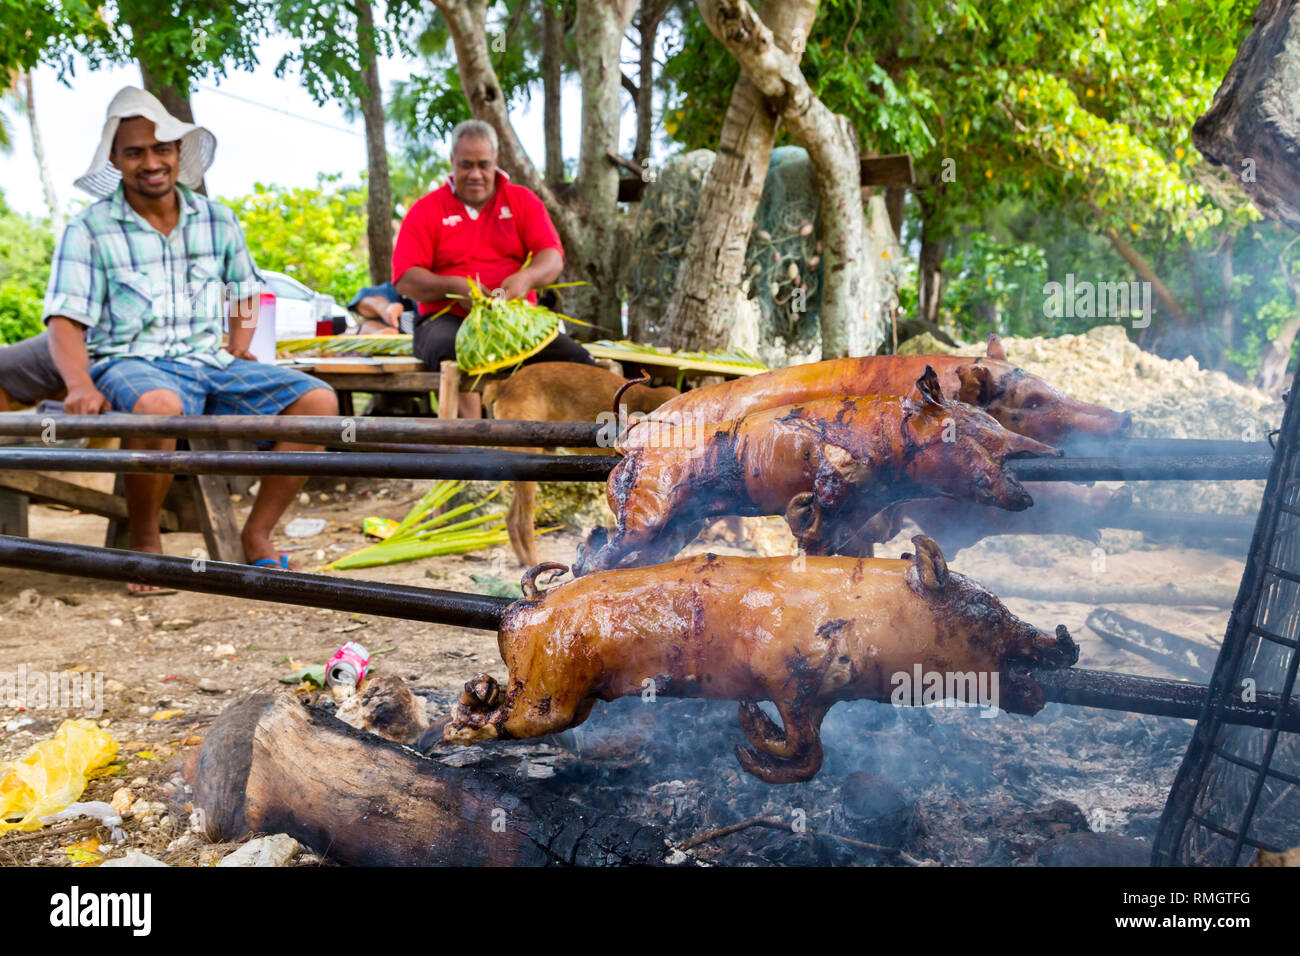 Tongatapu, Tonga - Jan 10 2014: a group of local native indigenous Polynesian men does a pork barbecue of small piglets on an open fire on a Tongan be Stock Photo